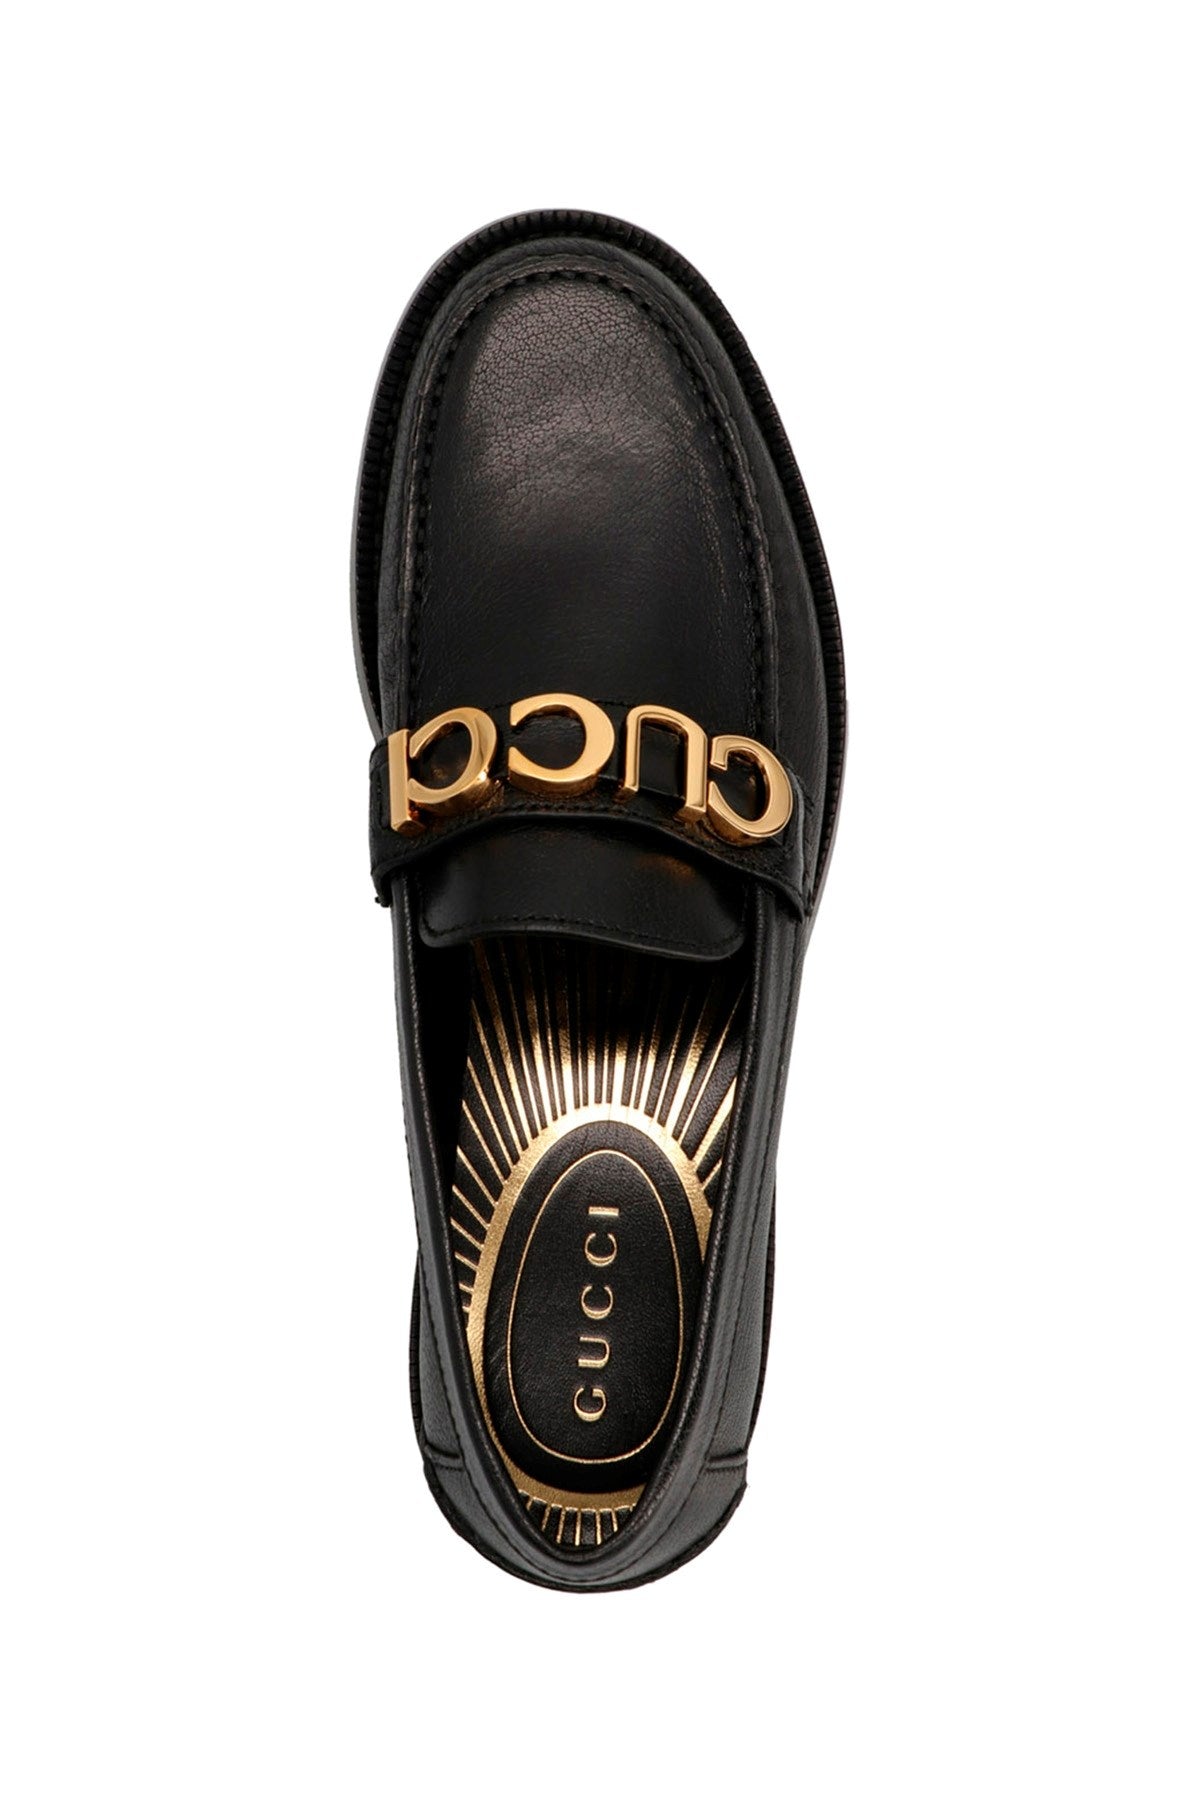 GUCCI BLACK LEATHER LOAFERS